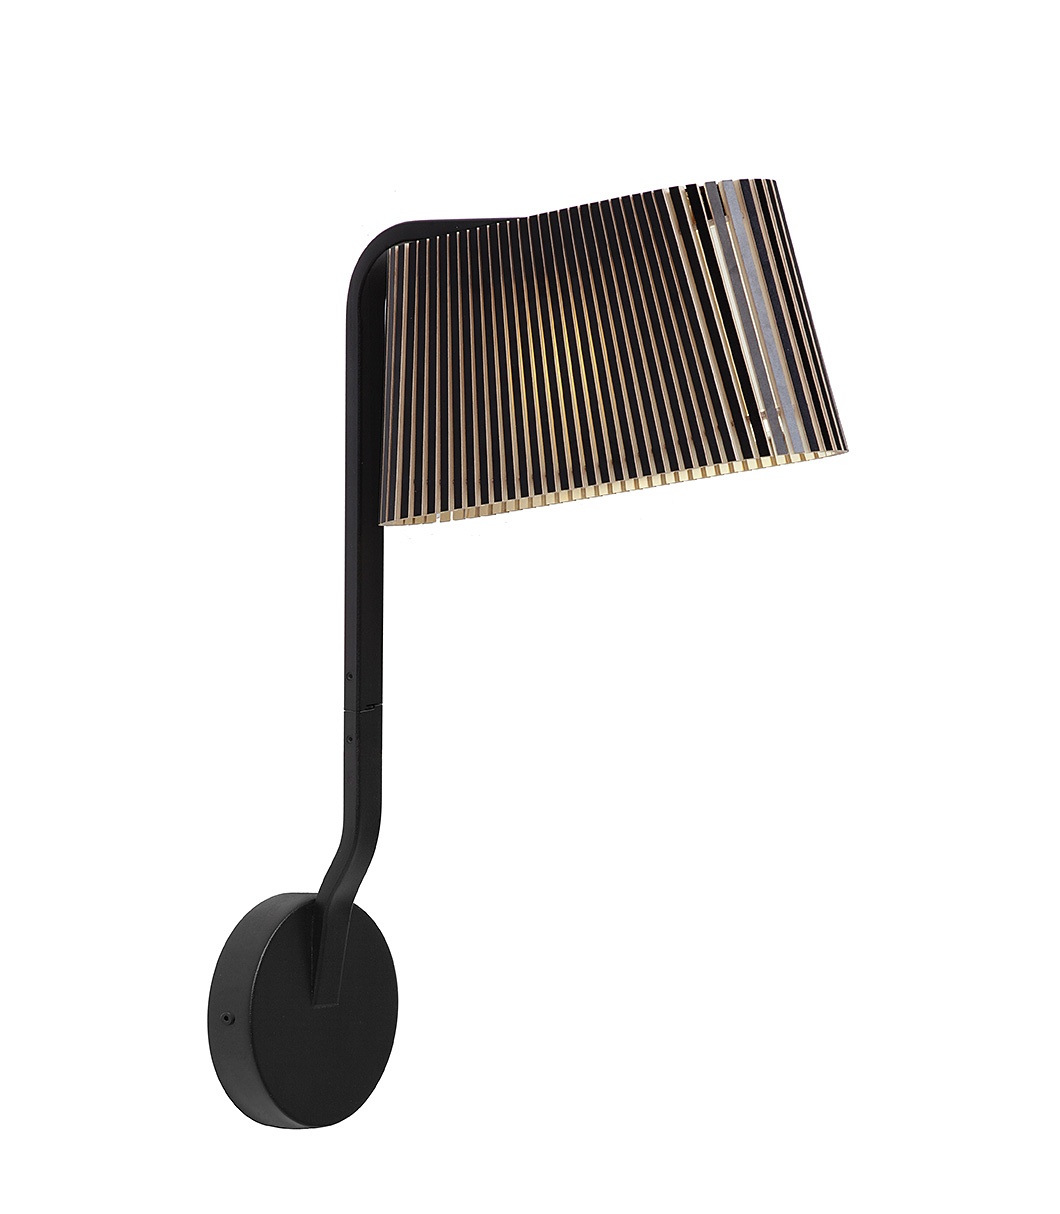 Owalo 7030 wall lamp is available in black laminated